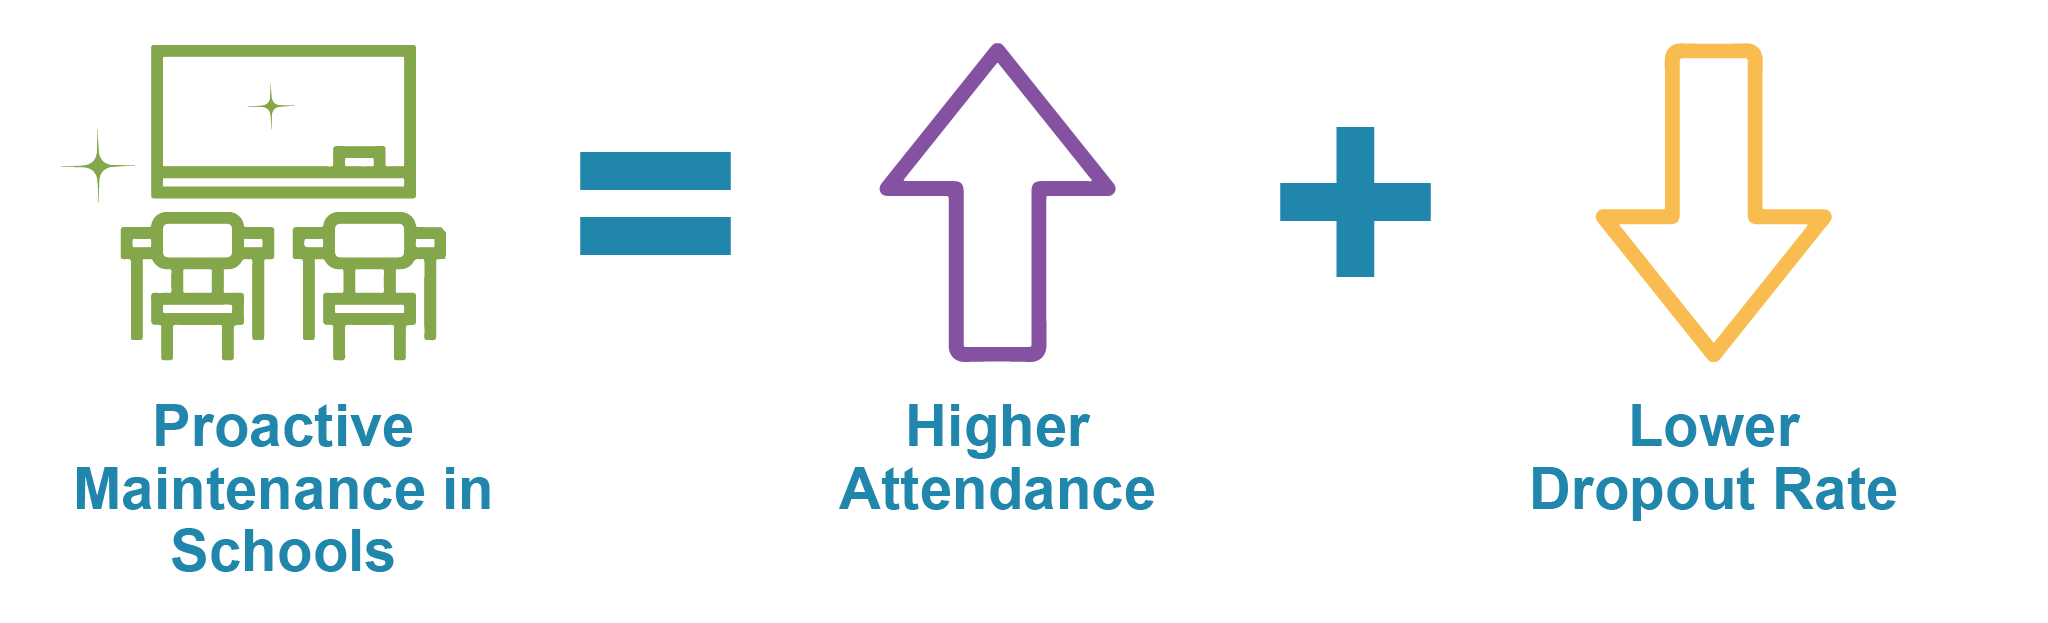 Proactive School Maintenance equals Higher Attendance and Lower Dropout Rate